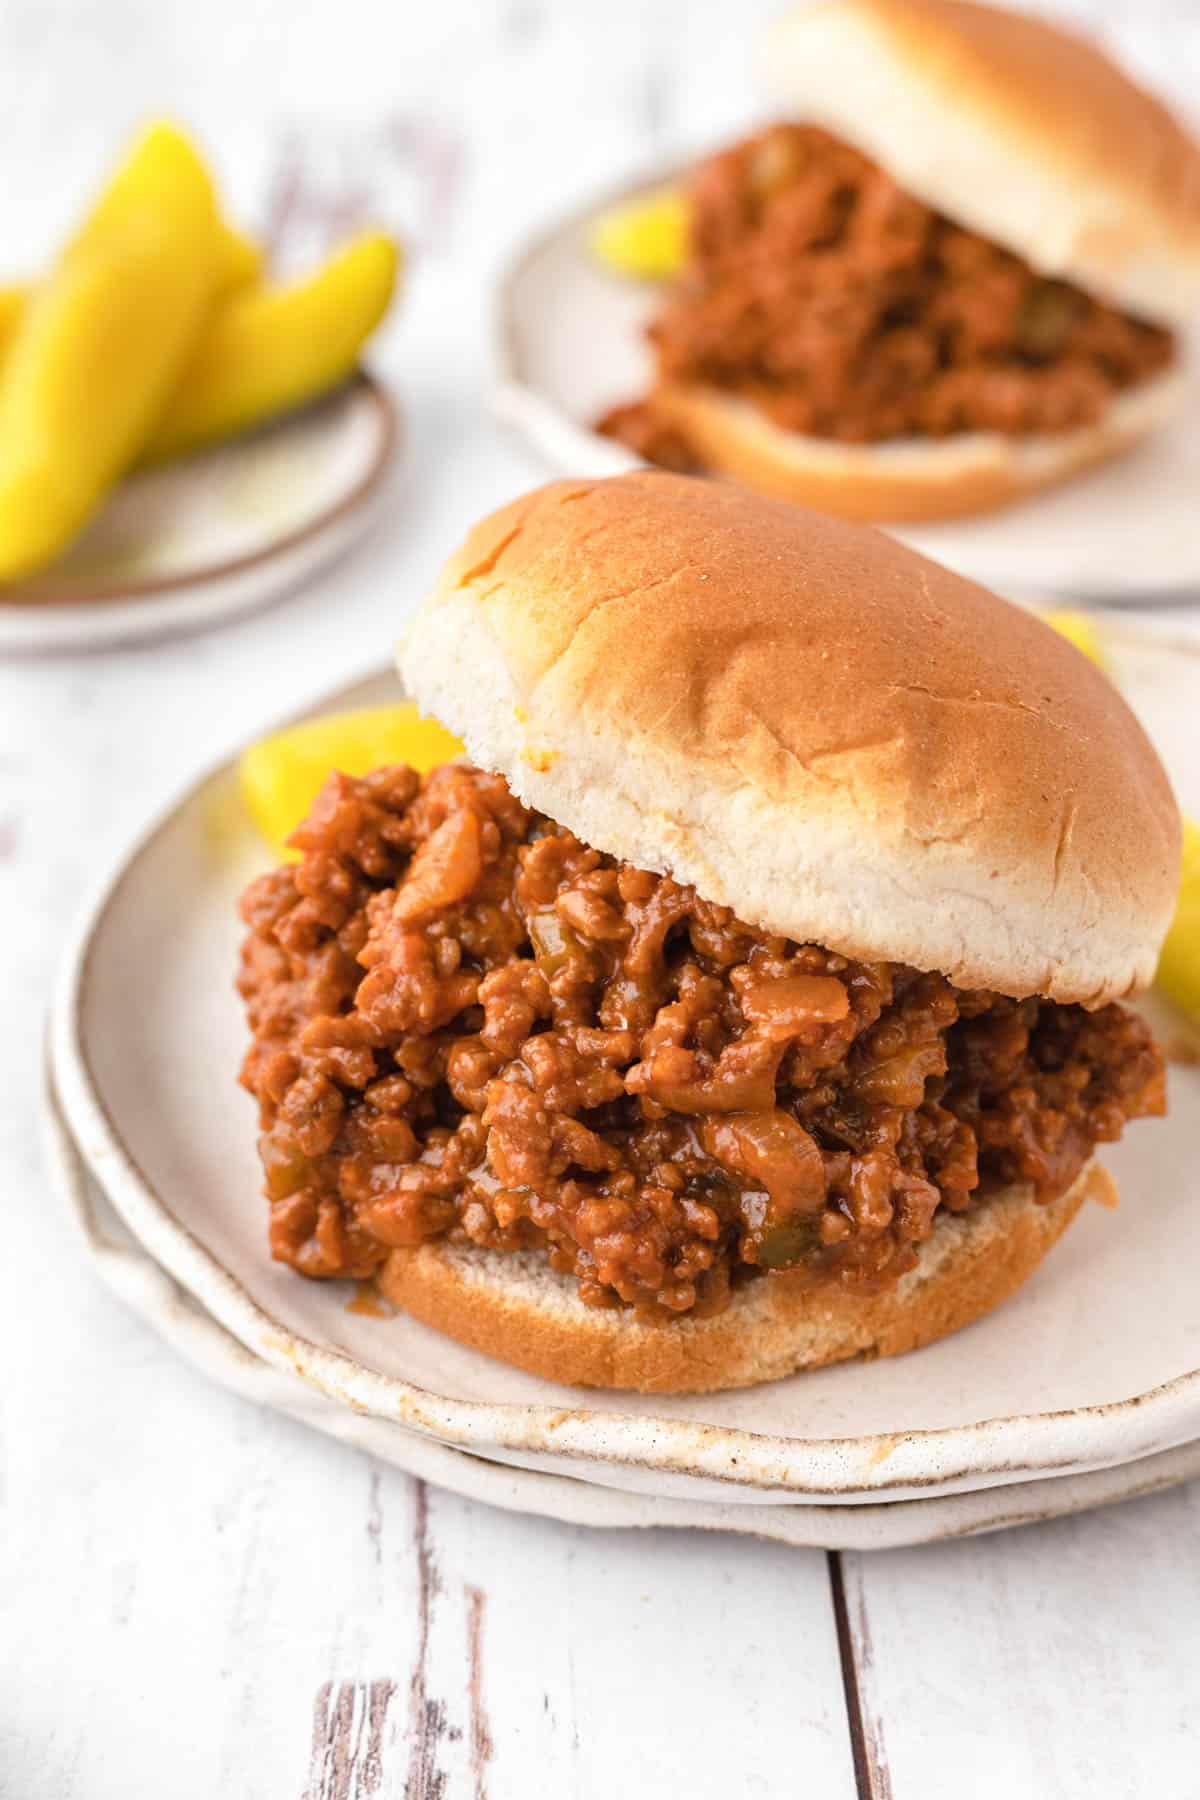 An image of sloppy joes on plates with pickles.